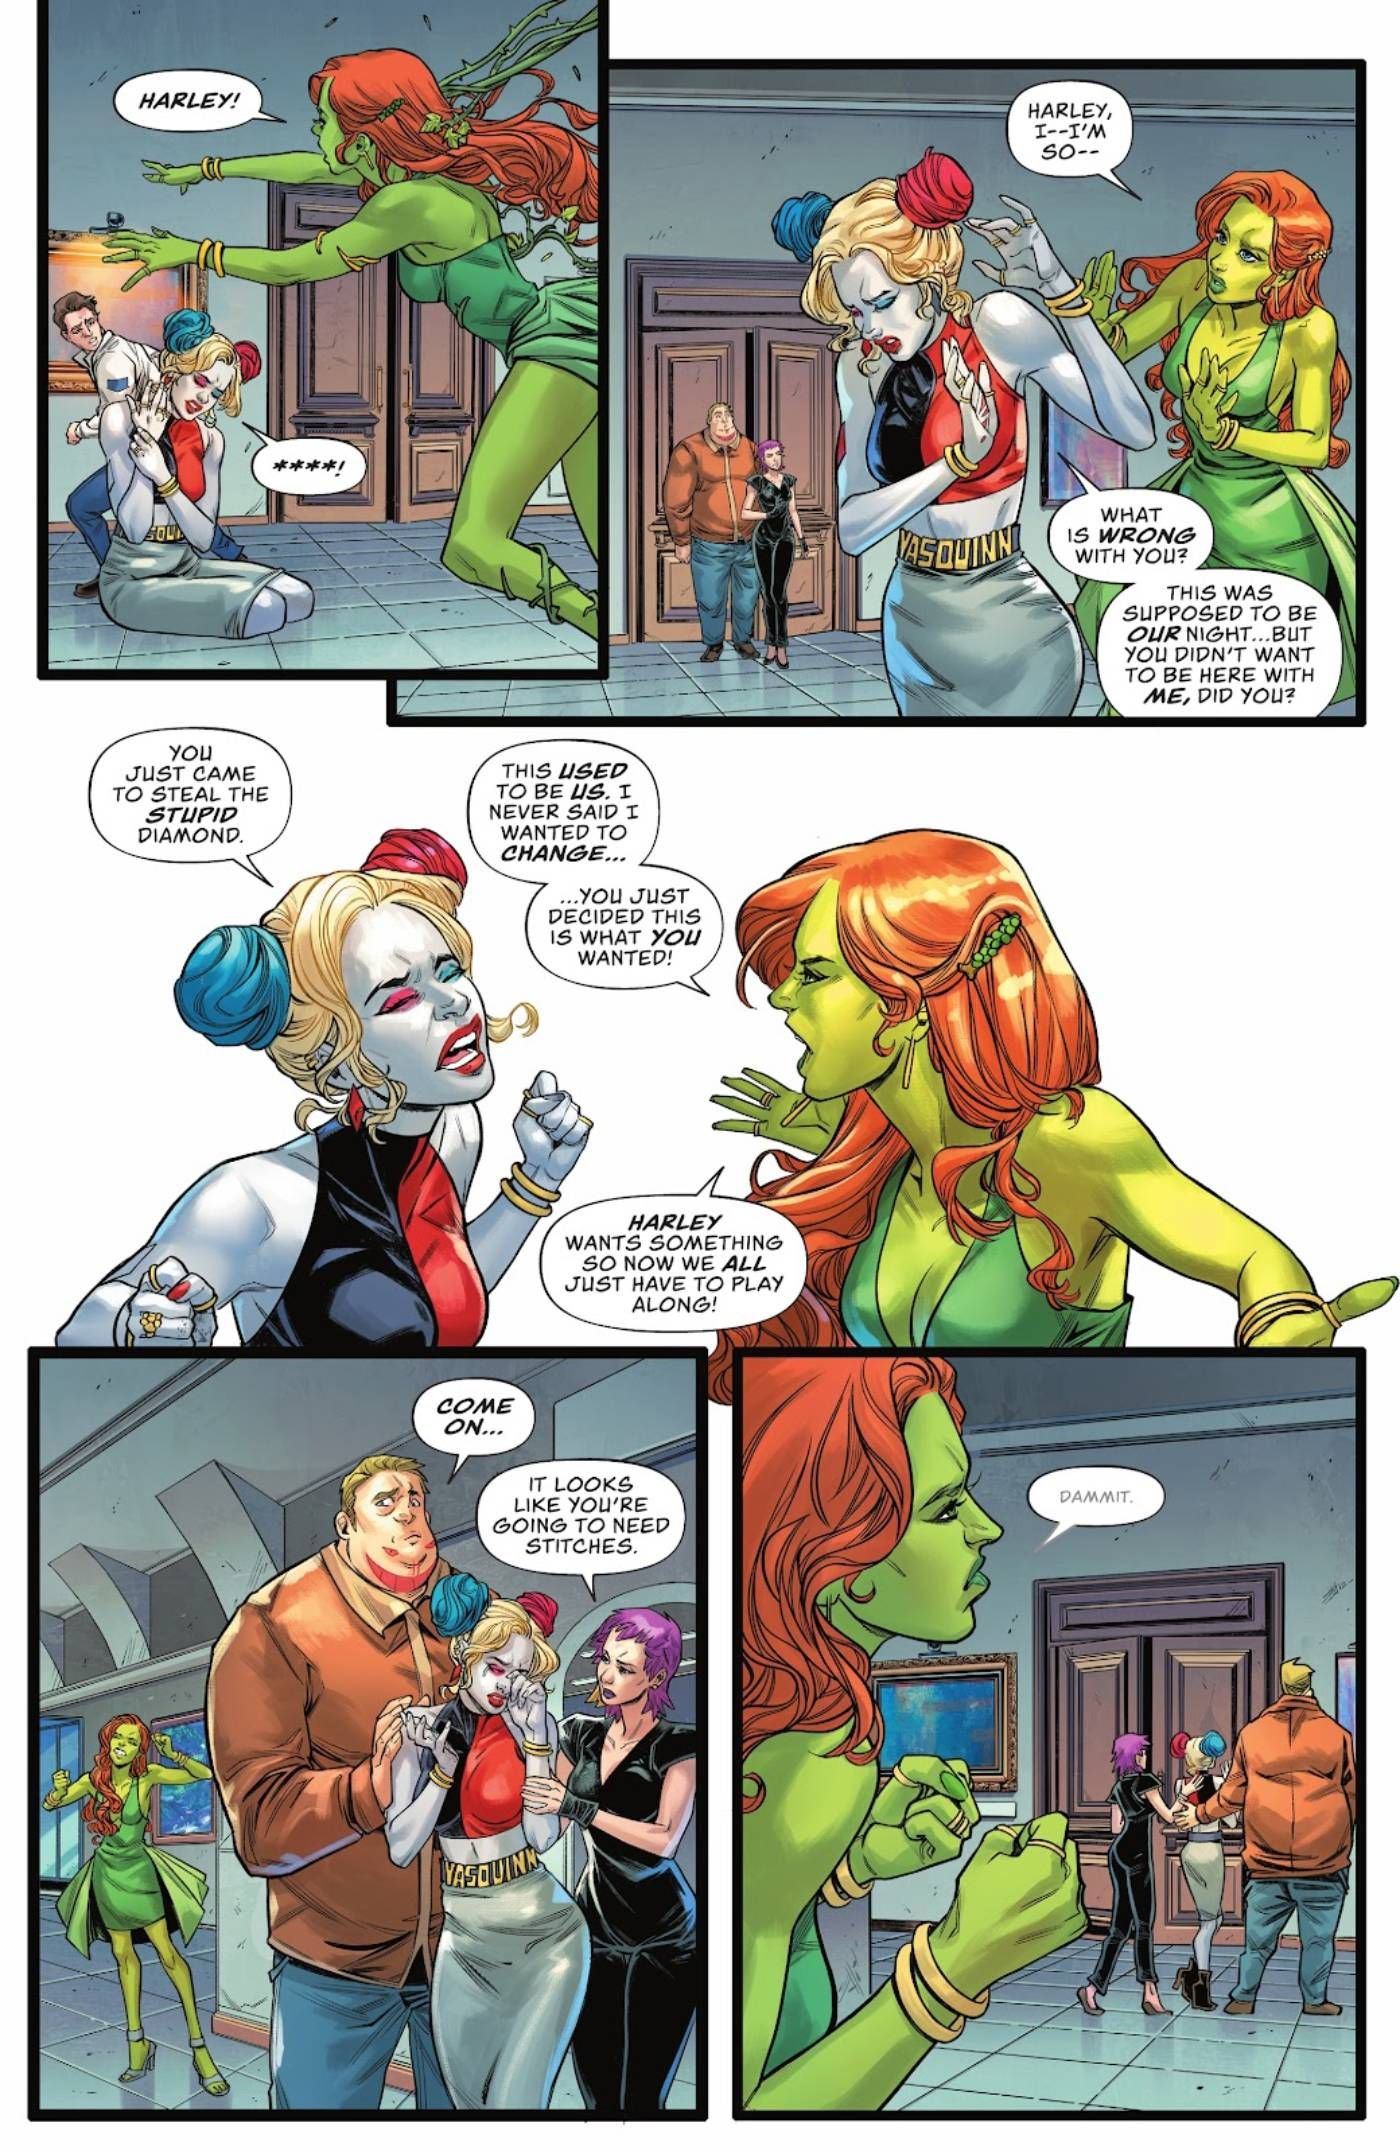 Why Harley Quinn & Poison Ivy’s Break-Up Is So Controversial